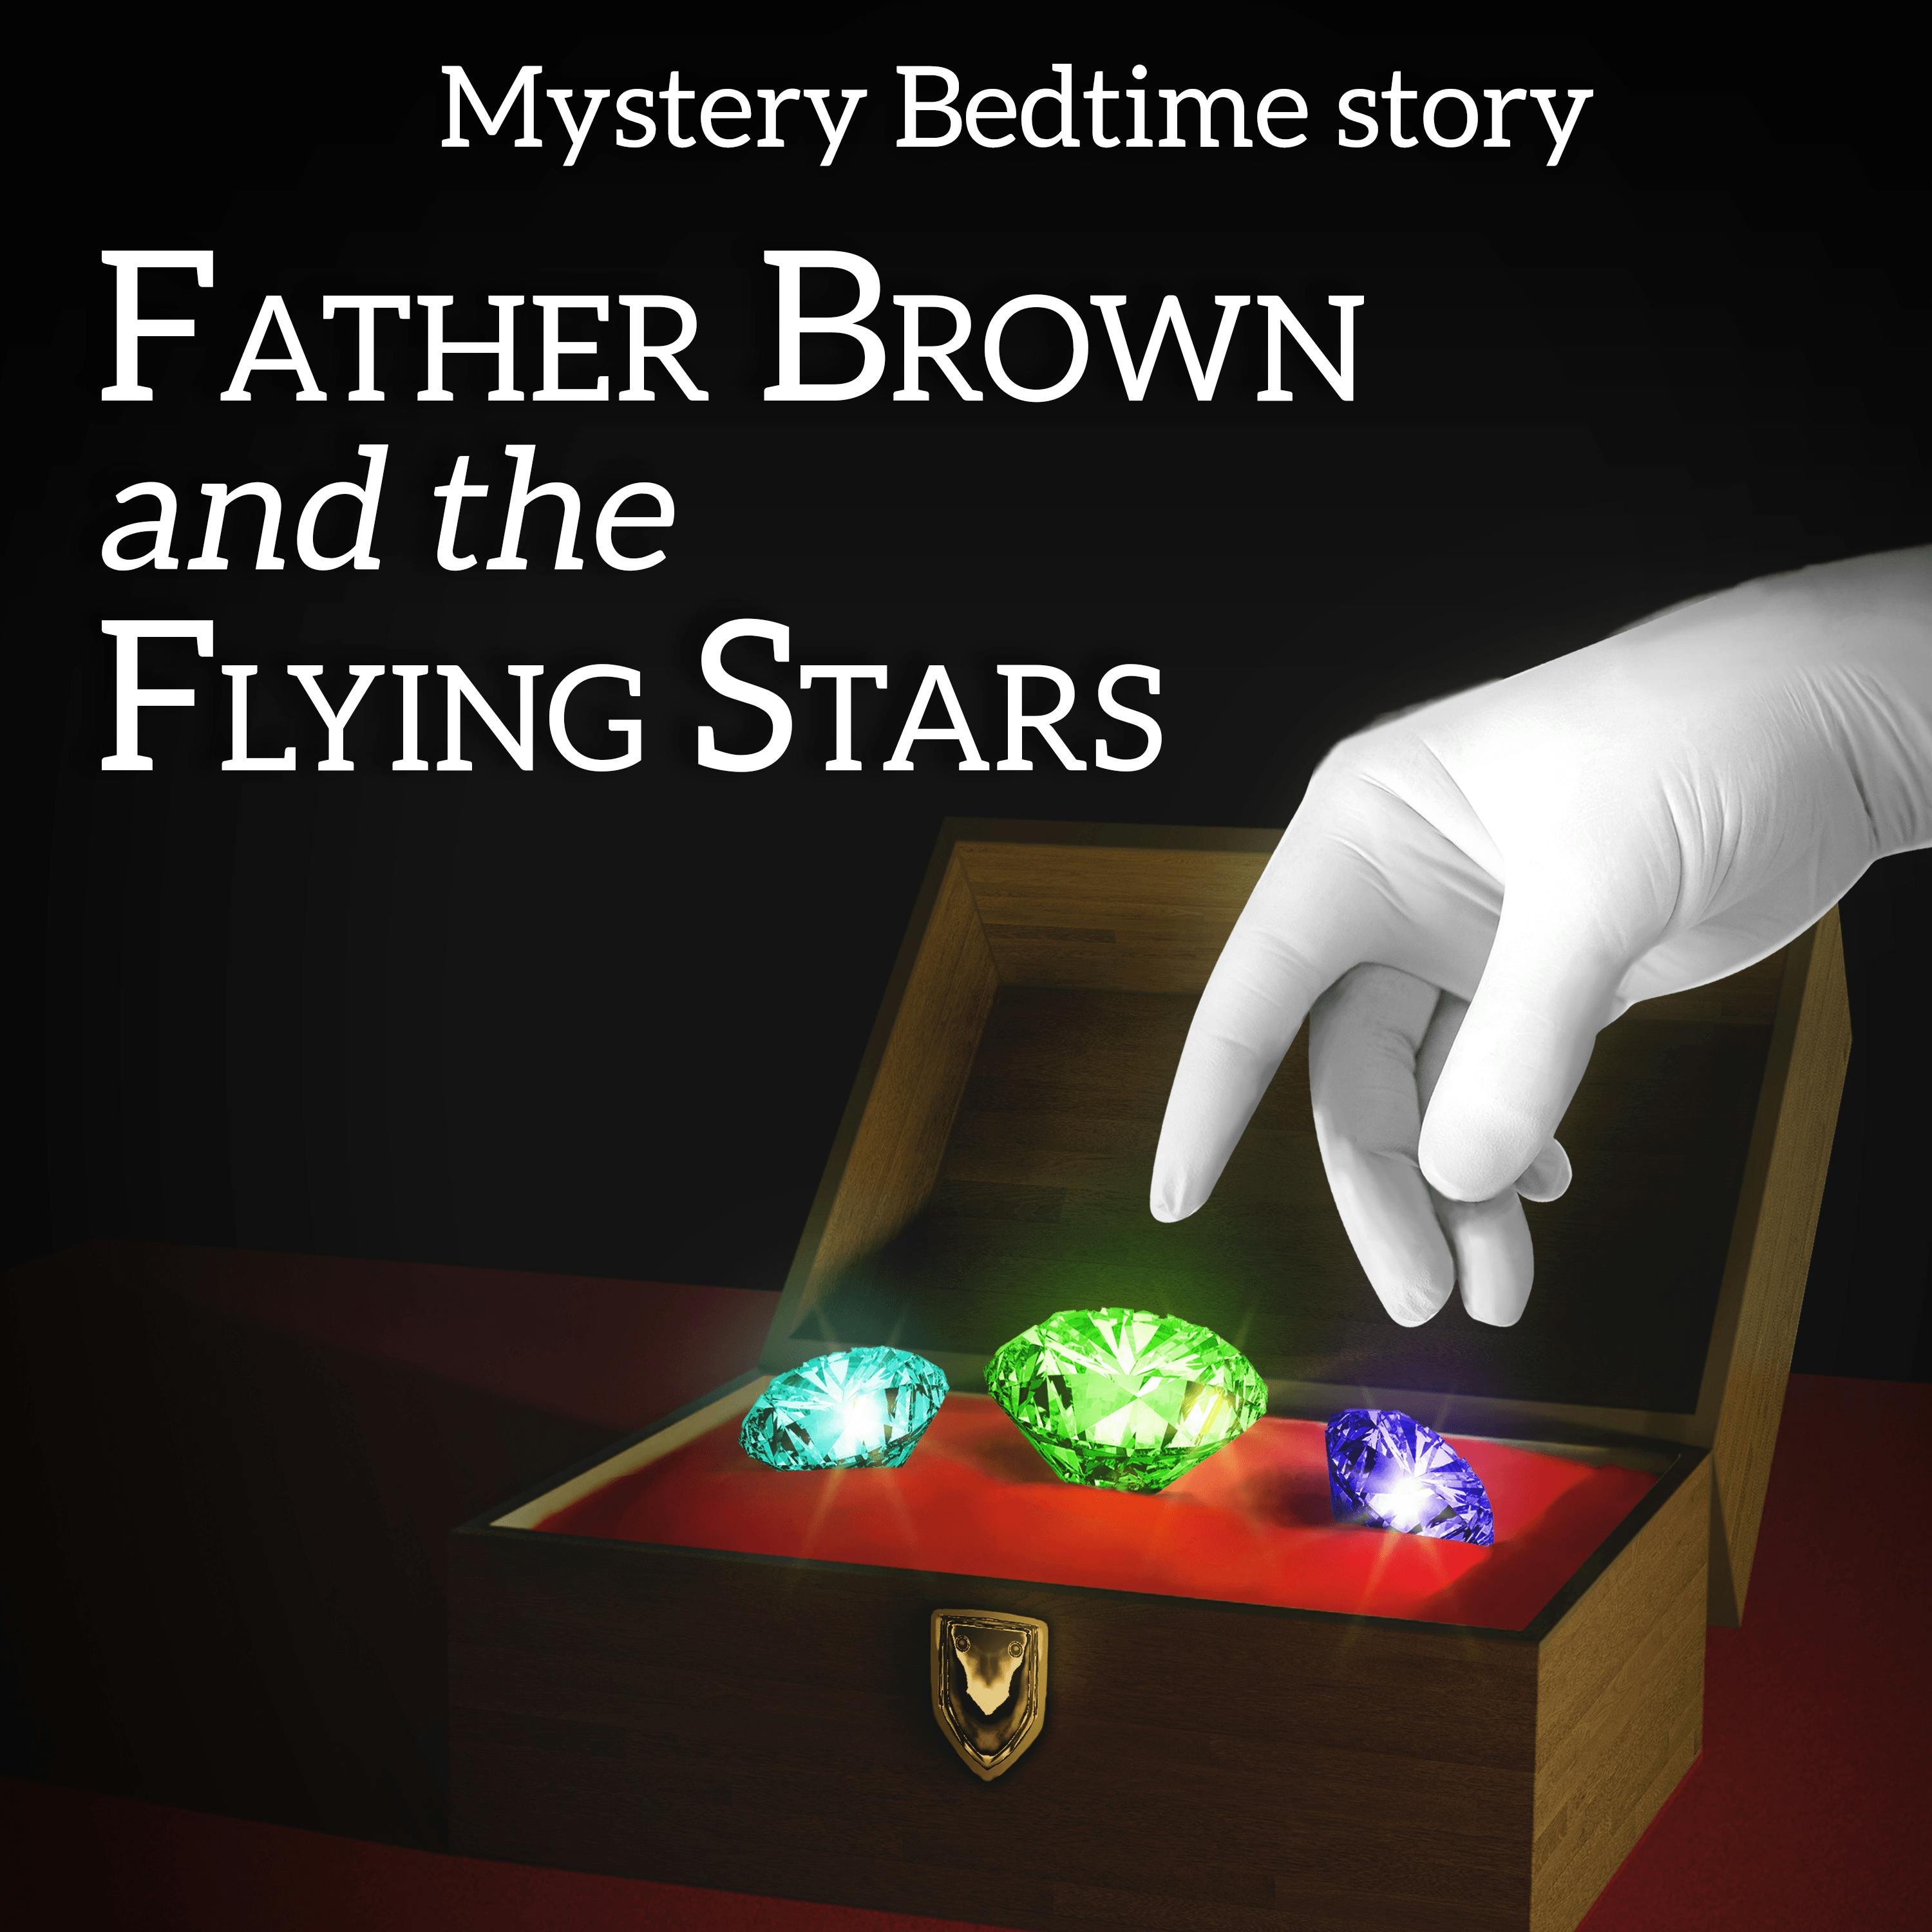 Father Brown and The Flying Stars - G. K. Chesterton (A Christmas Mystery)